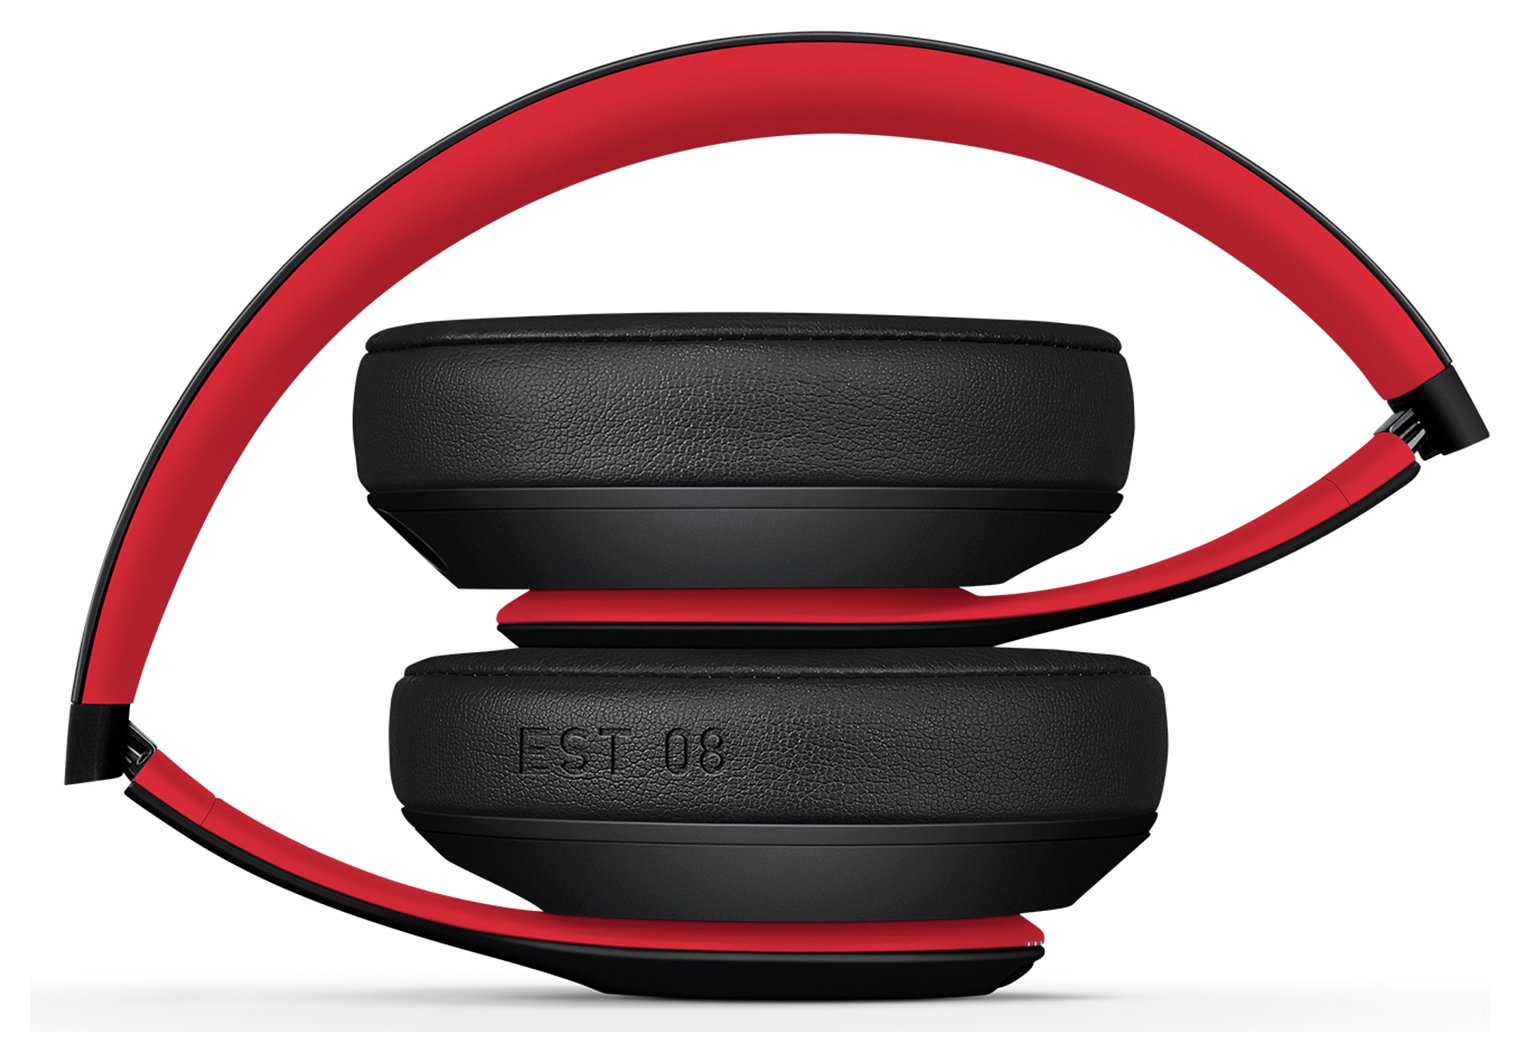 Beats by Dre Studio 3 Wireless Headphones Decade Edition Review